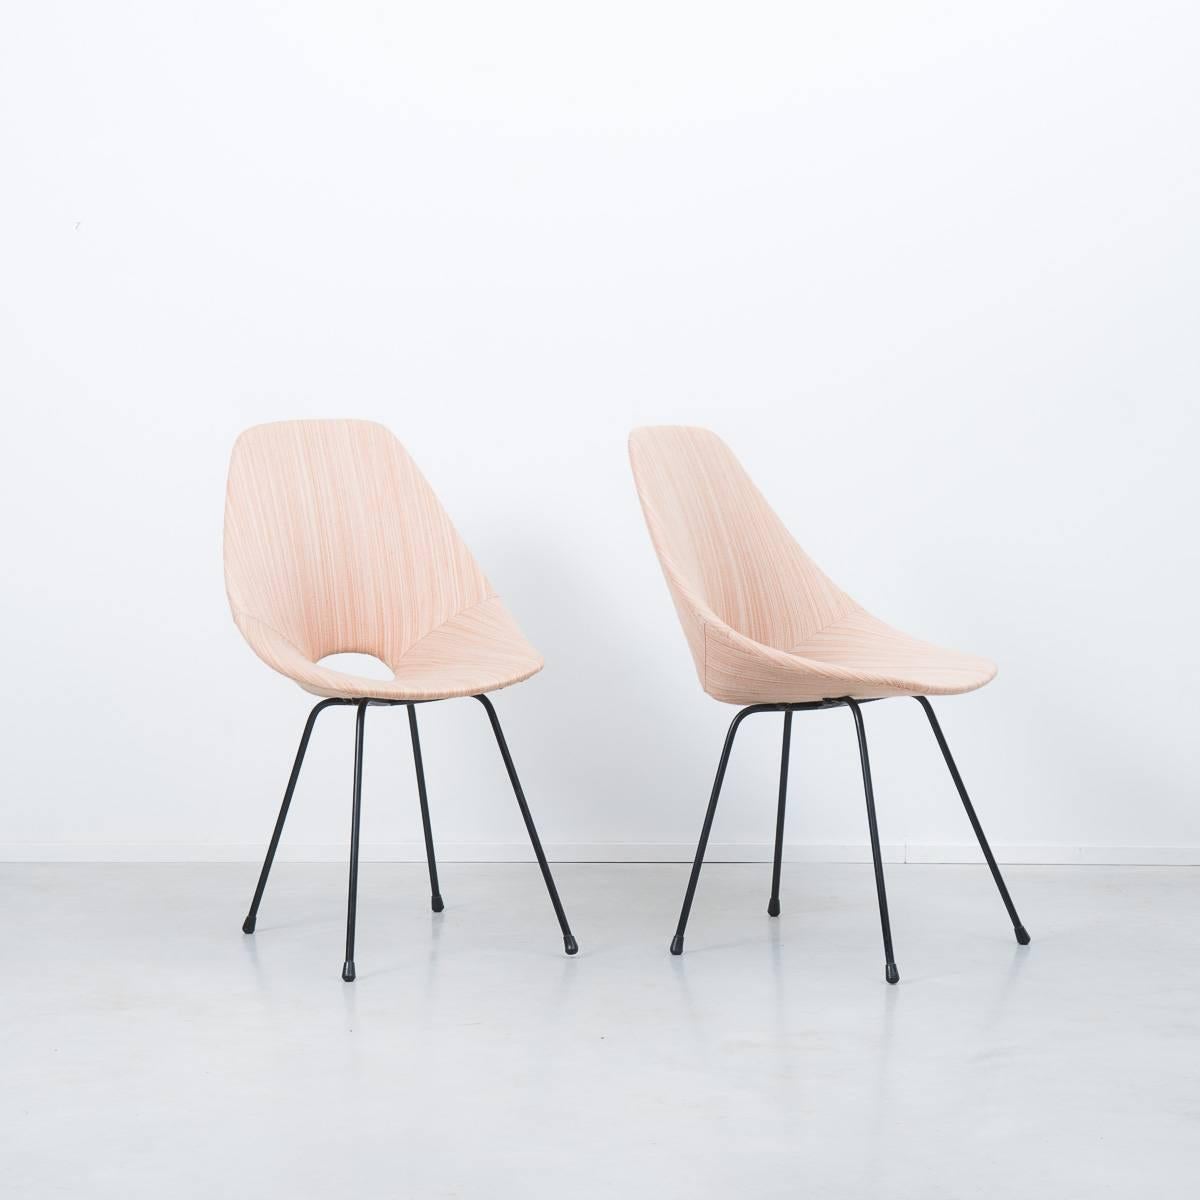 A rare pair of Italian upholstered 'Medea' chairs designed by Vittorio Nobili for Brothers, Tagliabue in 1955. Their molded wooden seats are upholstered in their original rare soft blush fabric and supported by black enameled steel legs. The